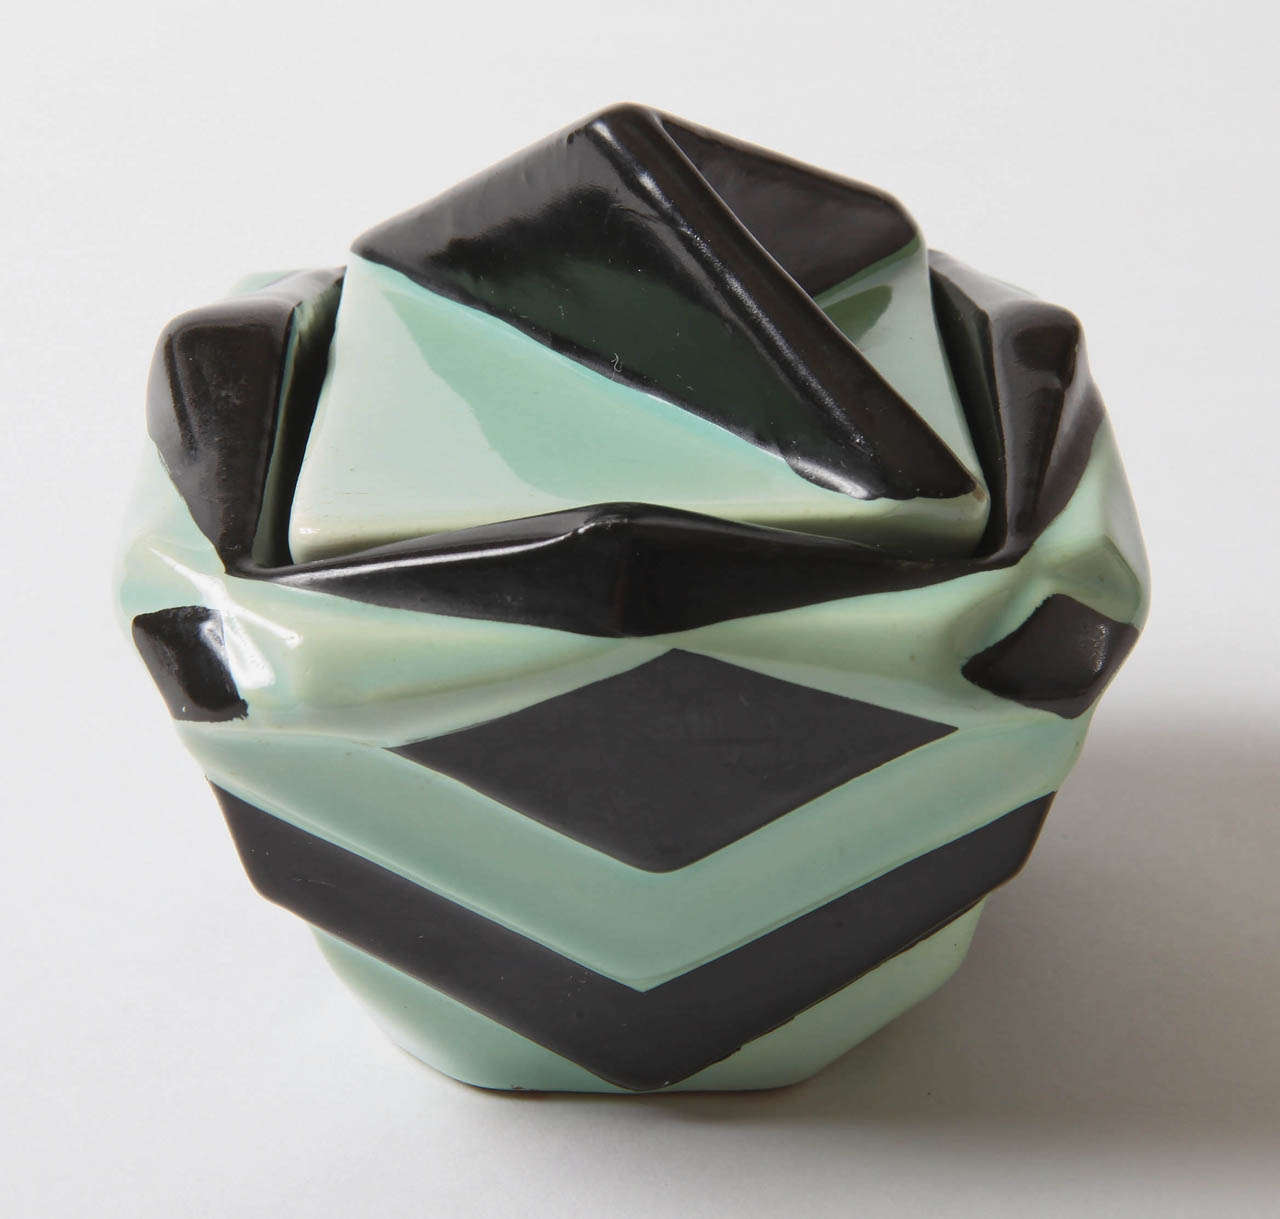 Mint green and black ceramic signed covered box by Fulper.
Purchased from the Stangl/Fulper museum de-accession.
Still on-line in situ museum display.
Signed Fulper #392

A fantastic and rare Ruba  / Muncie Rhombic collection complement.